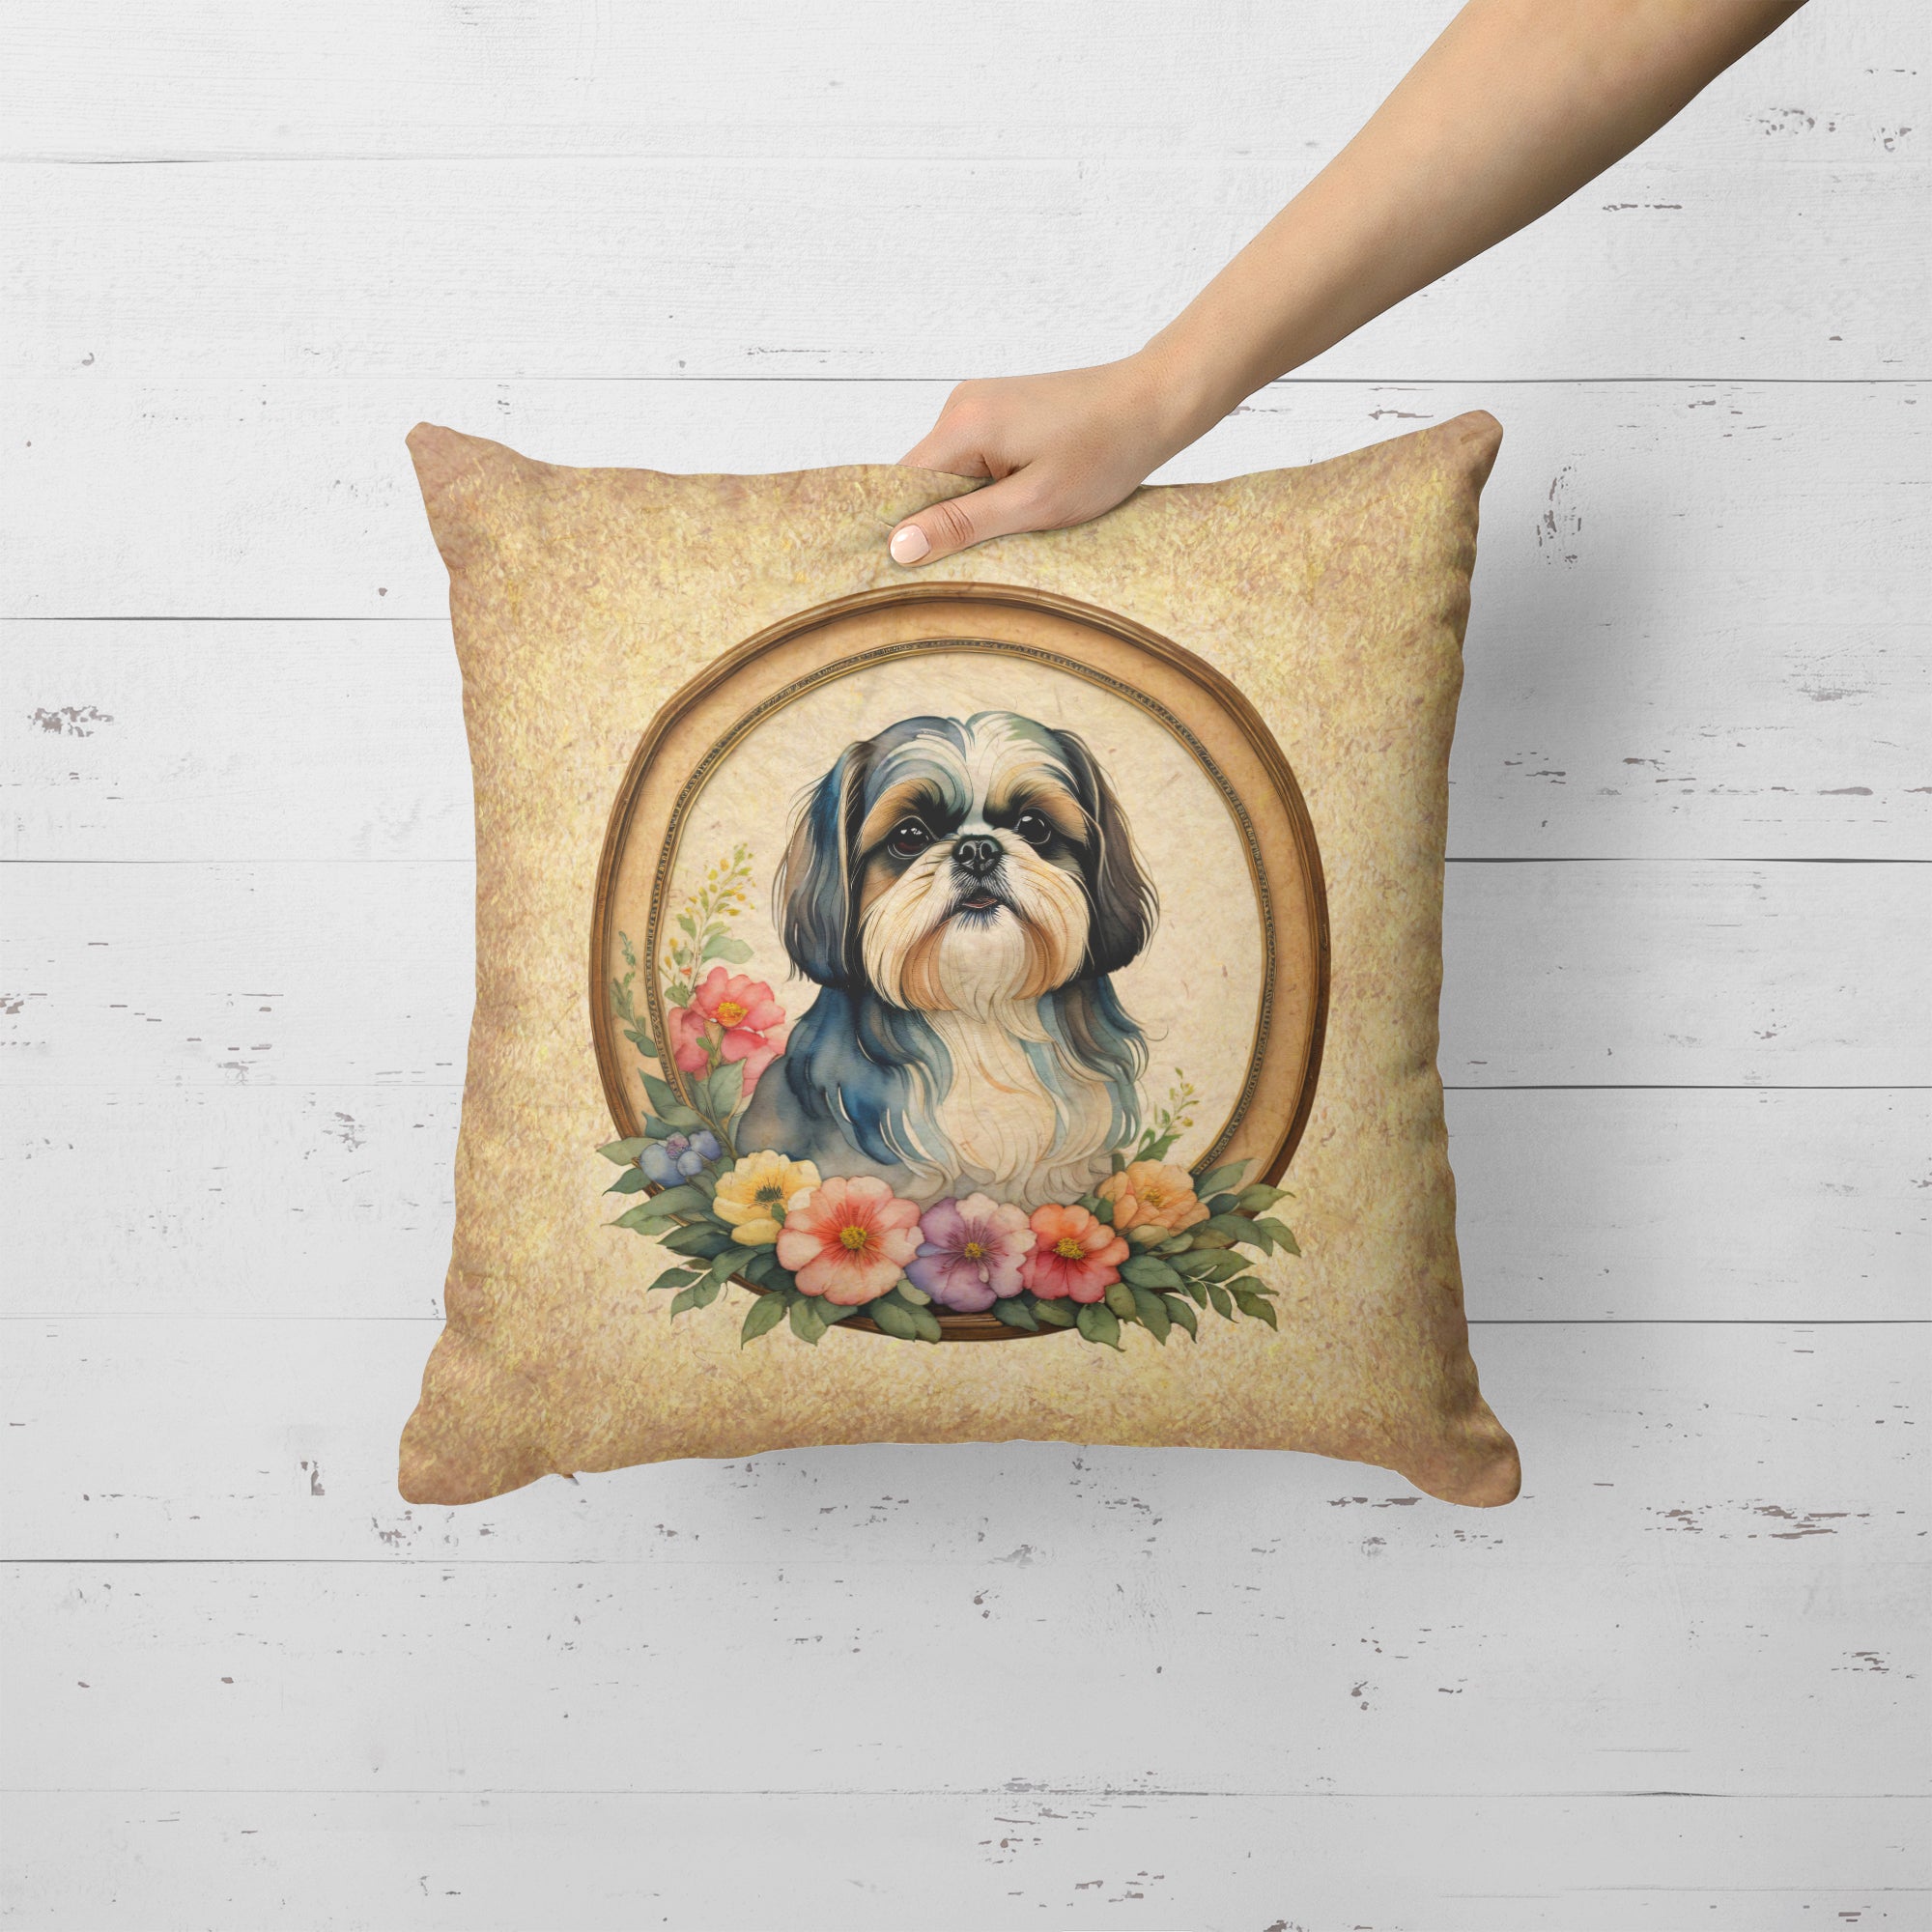 Shih Tzu and Flowers Fabric Decorative Pillow